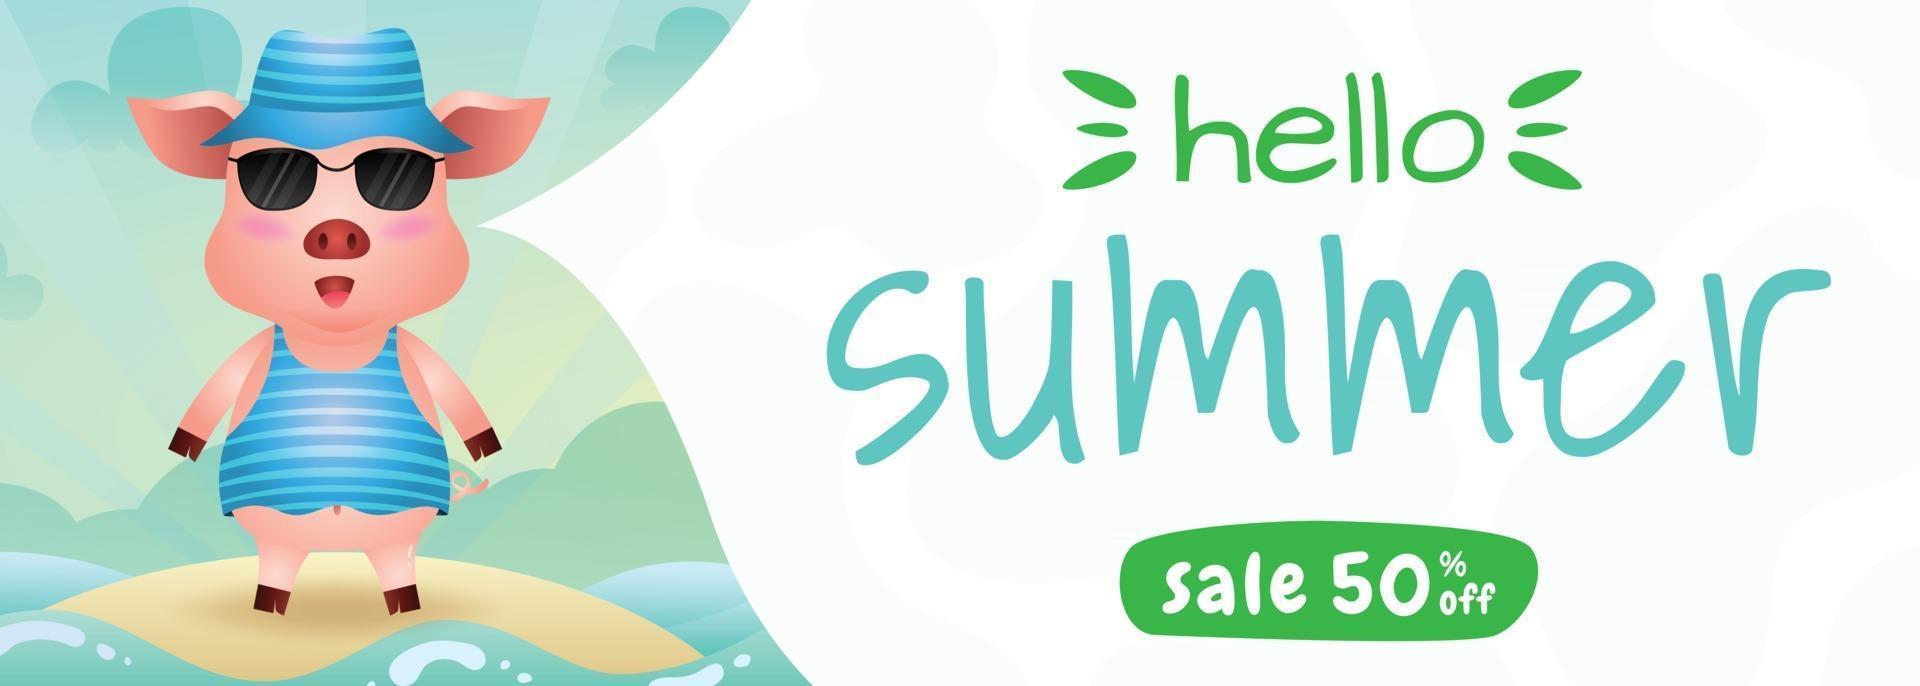 summer sale banner with a cute pig using summer costume vector